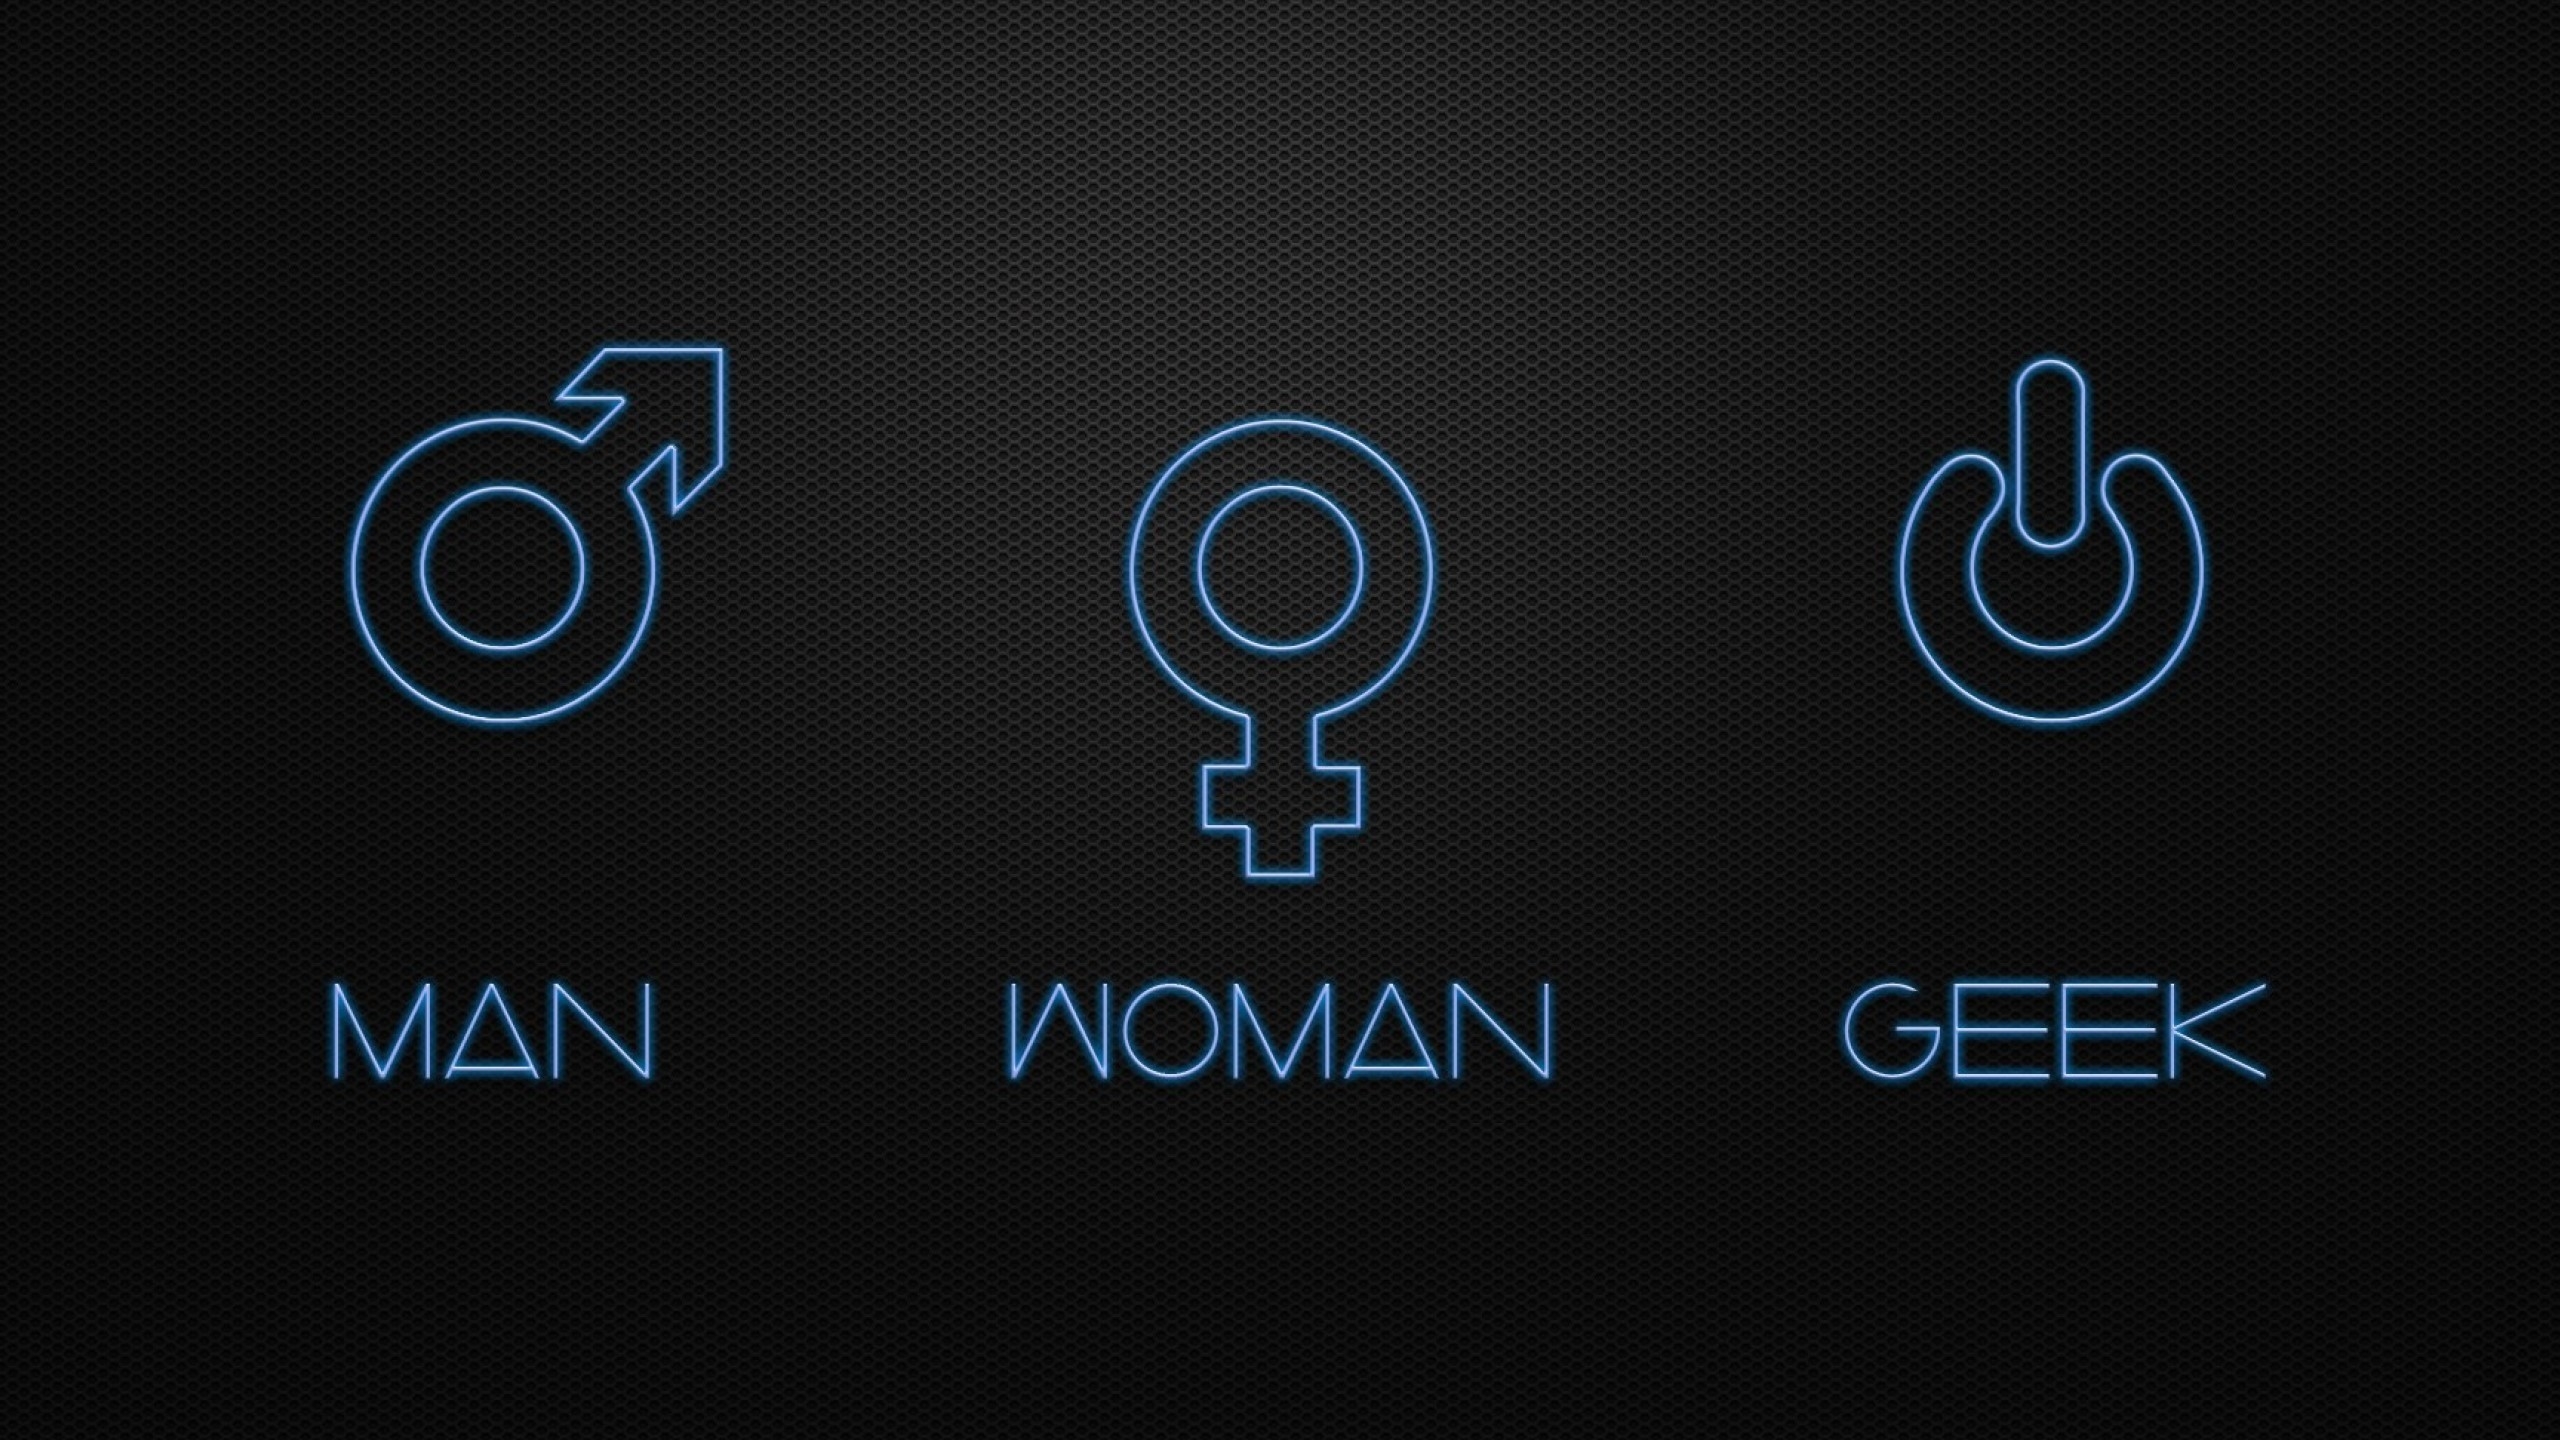 Man Woman and Geek for 2560x1440 HDTV resolution